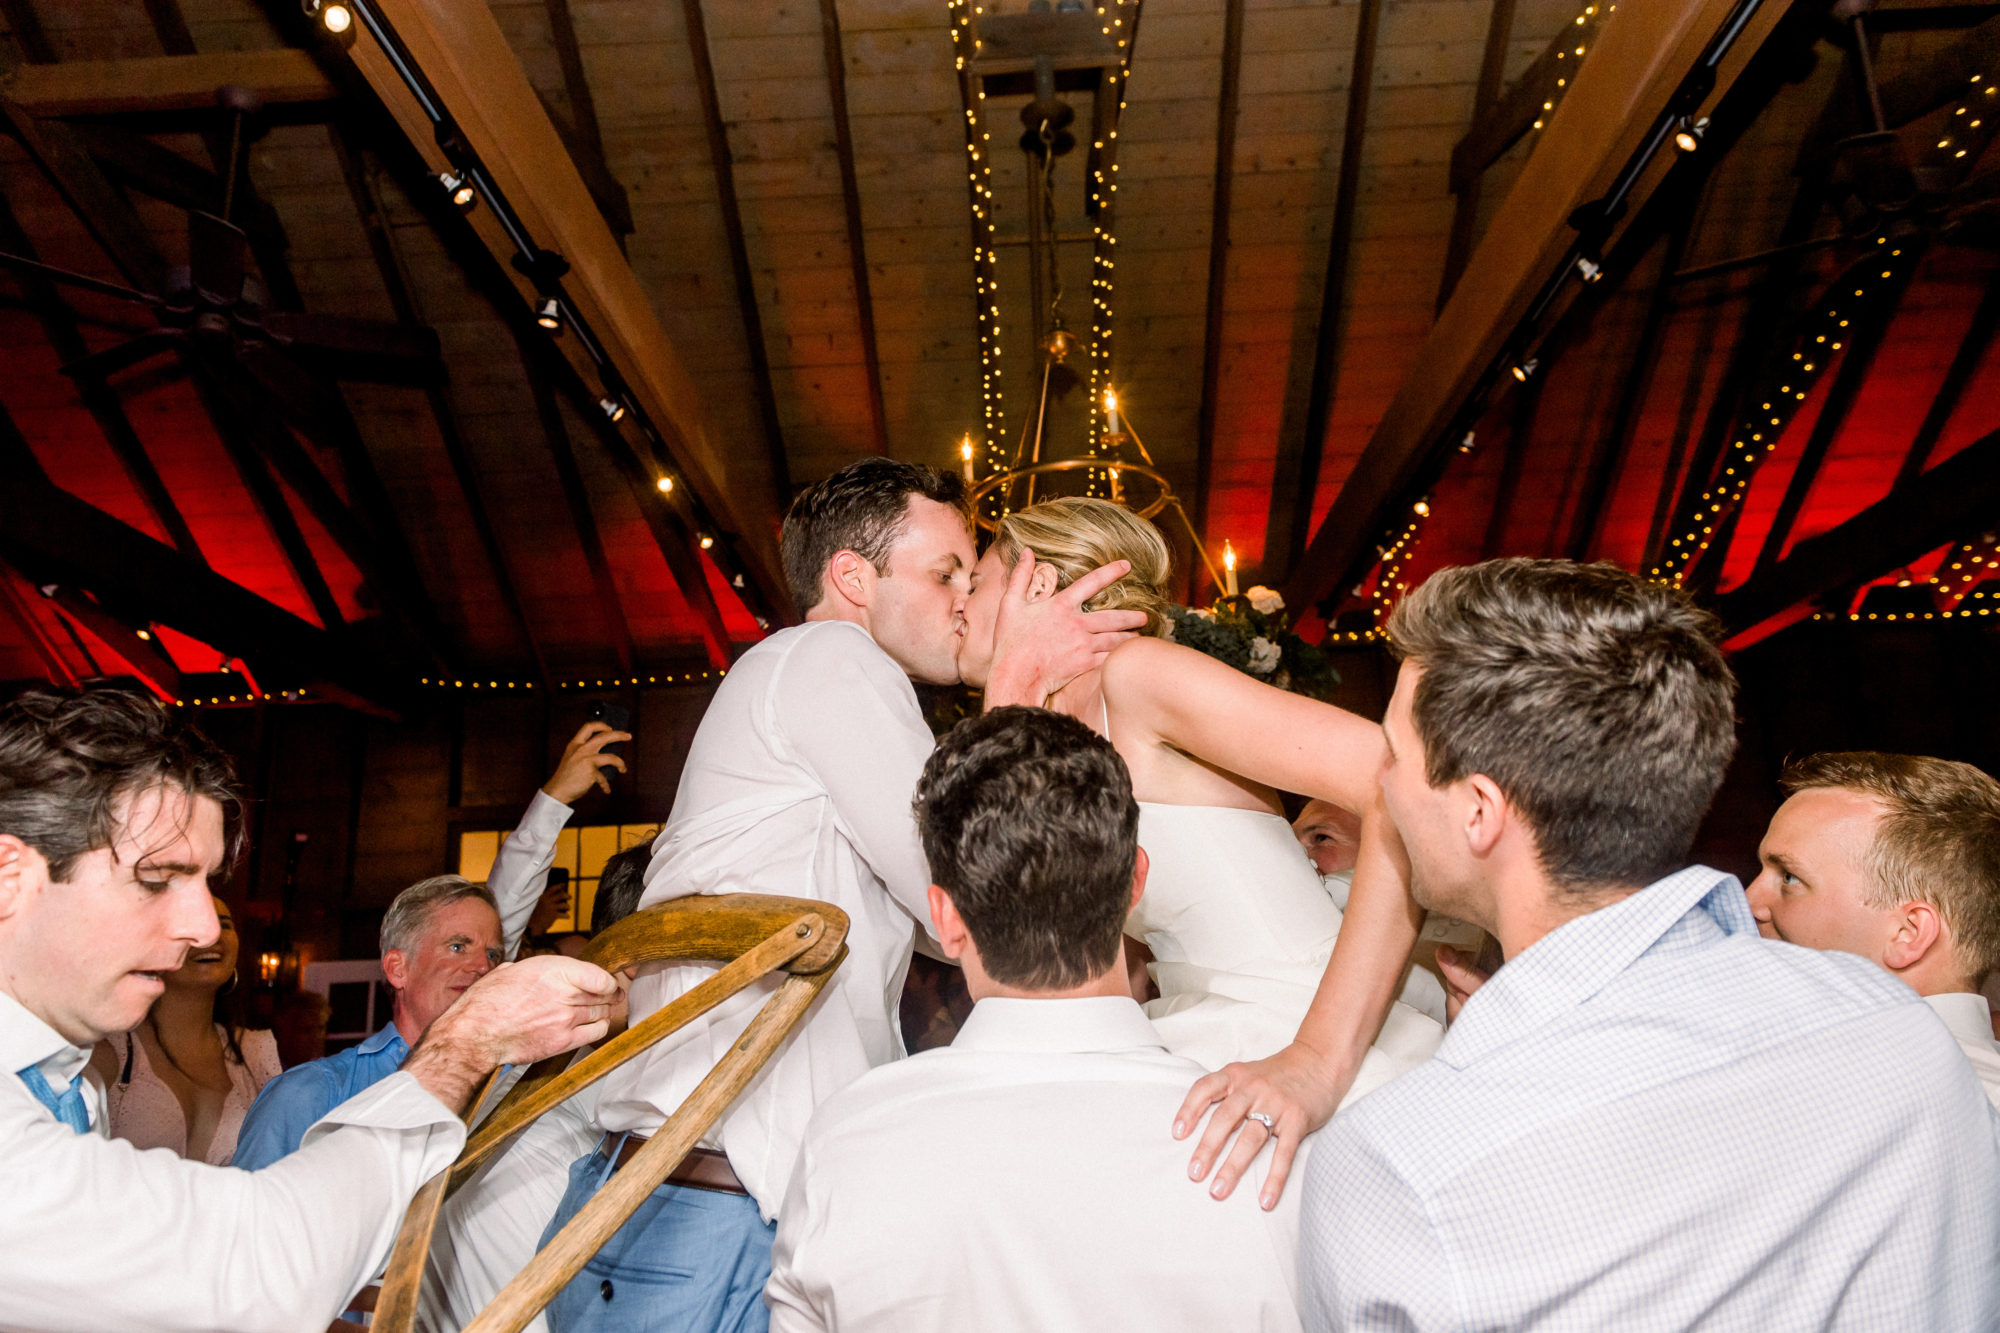 Wedding Photography Tips: How to Take Gorgeous Indoor Wedding Photos by popular New England photographer, Shannon Shipman: image of a bride and groom kissing each other while their surrounded by their wedding party. 